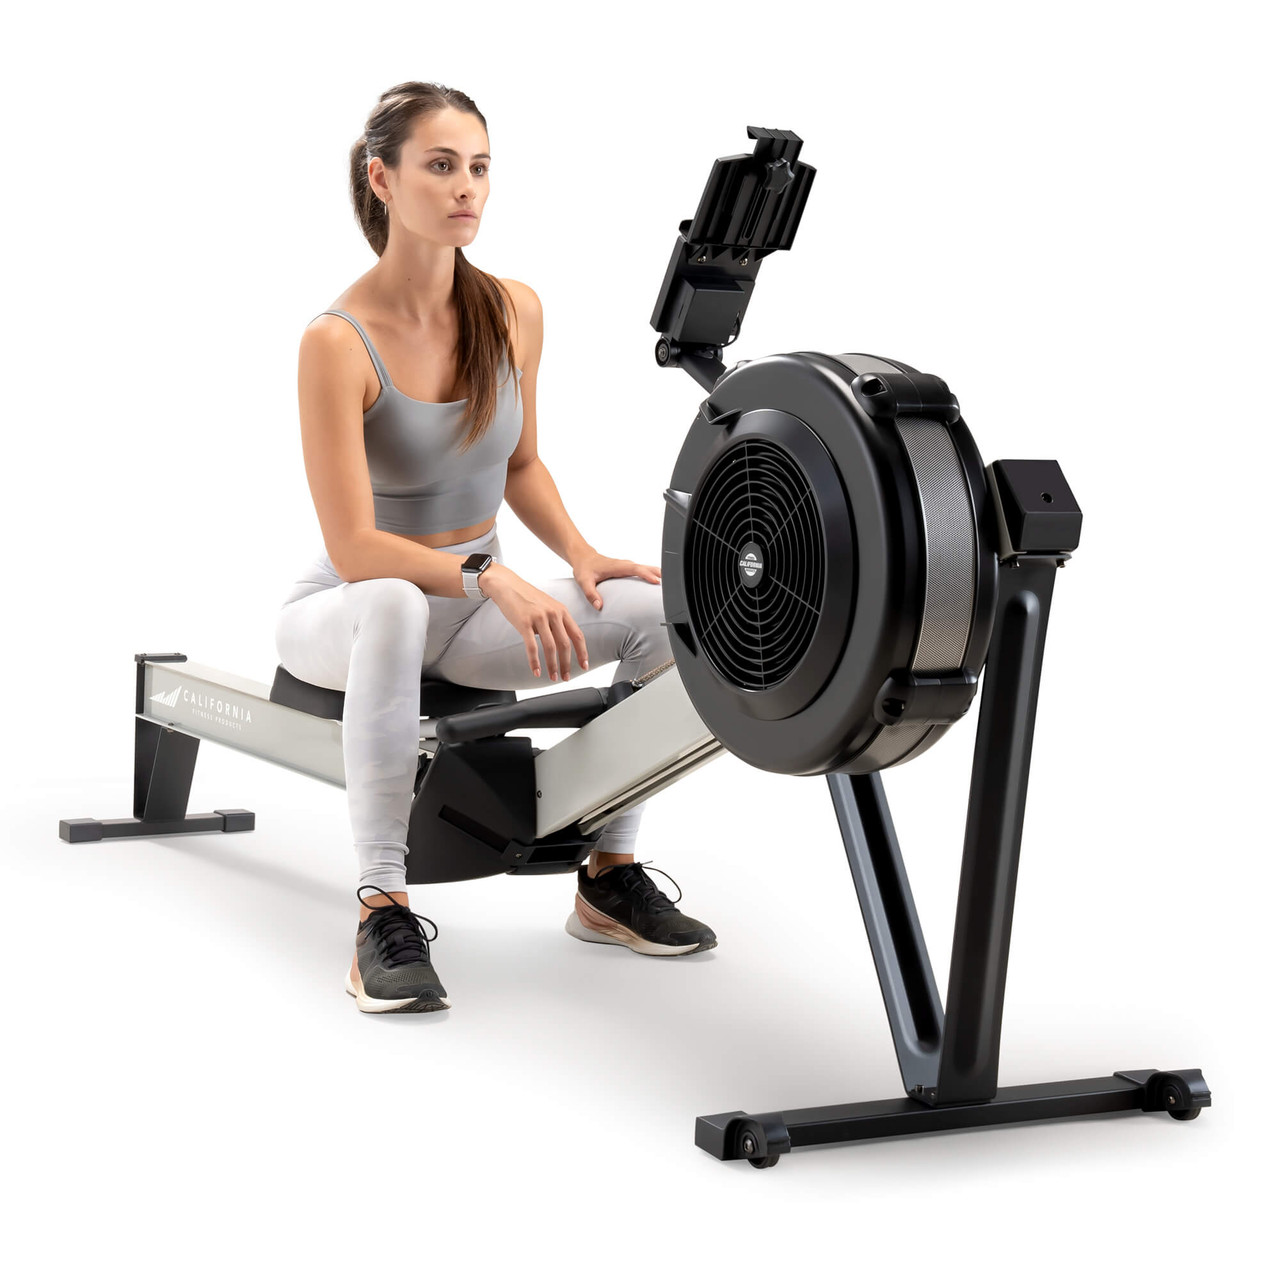 Deluxe Rowing Machine with Adjustable Air Resistance - NS-7874RW